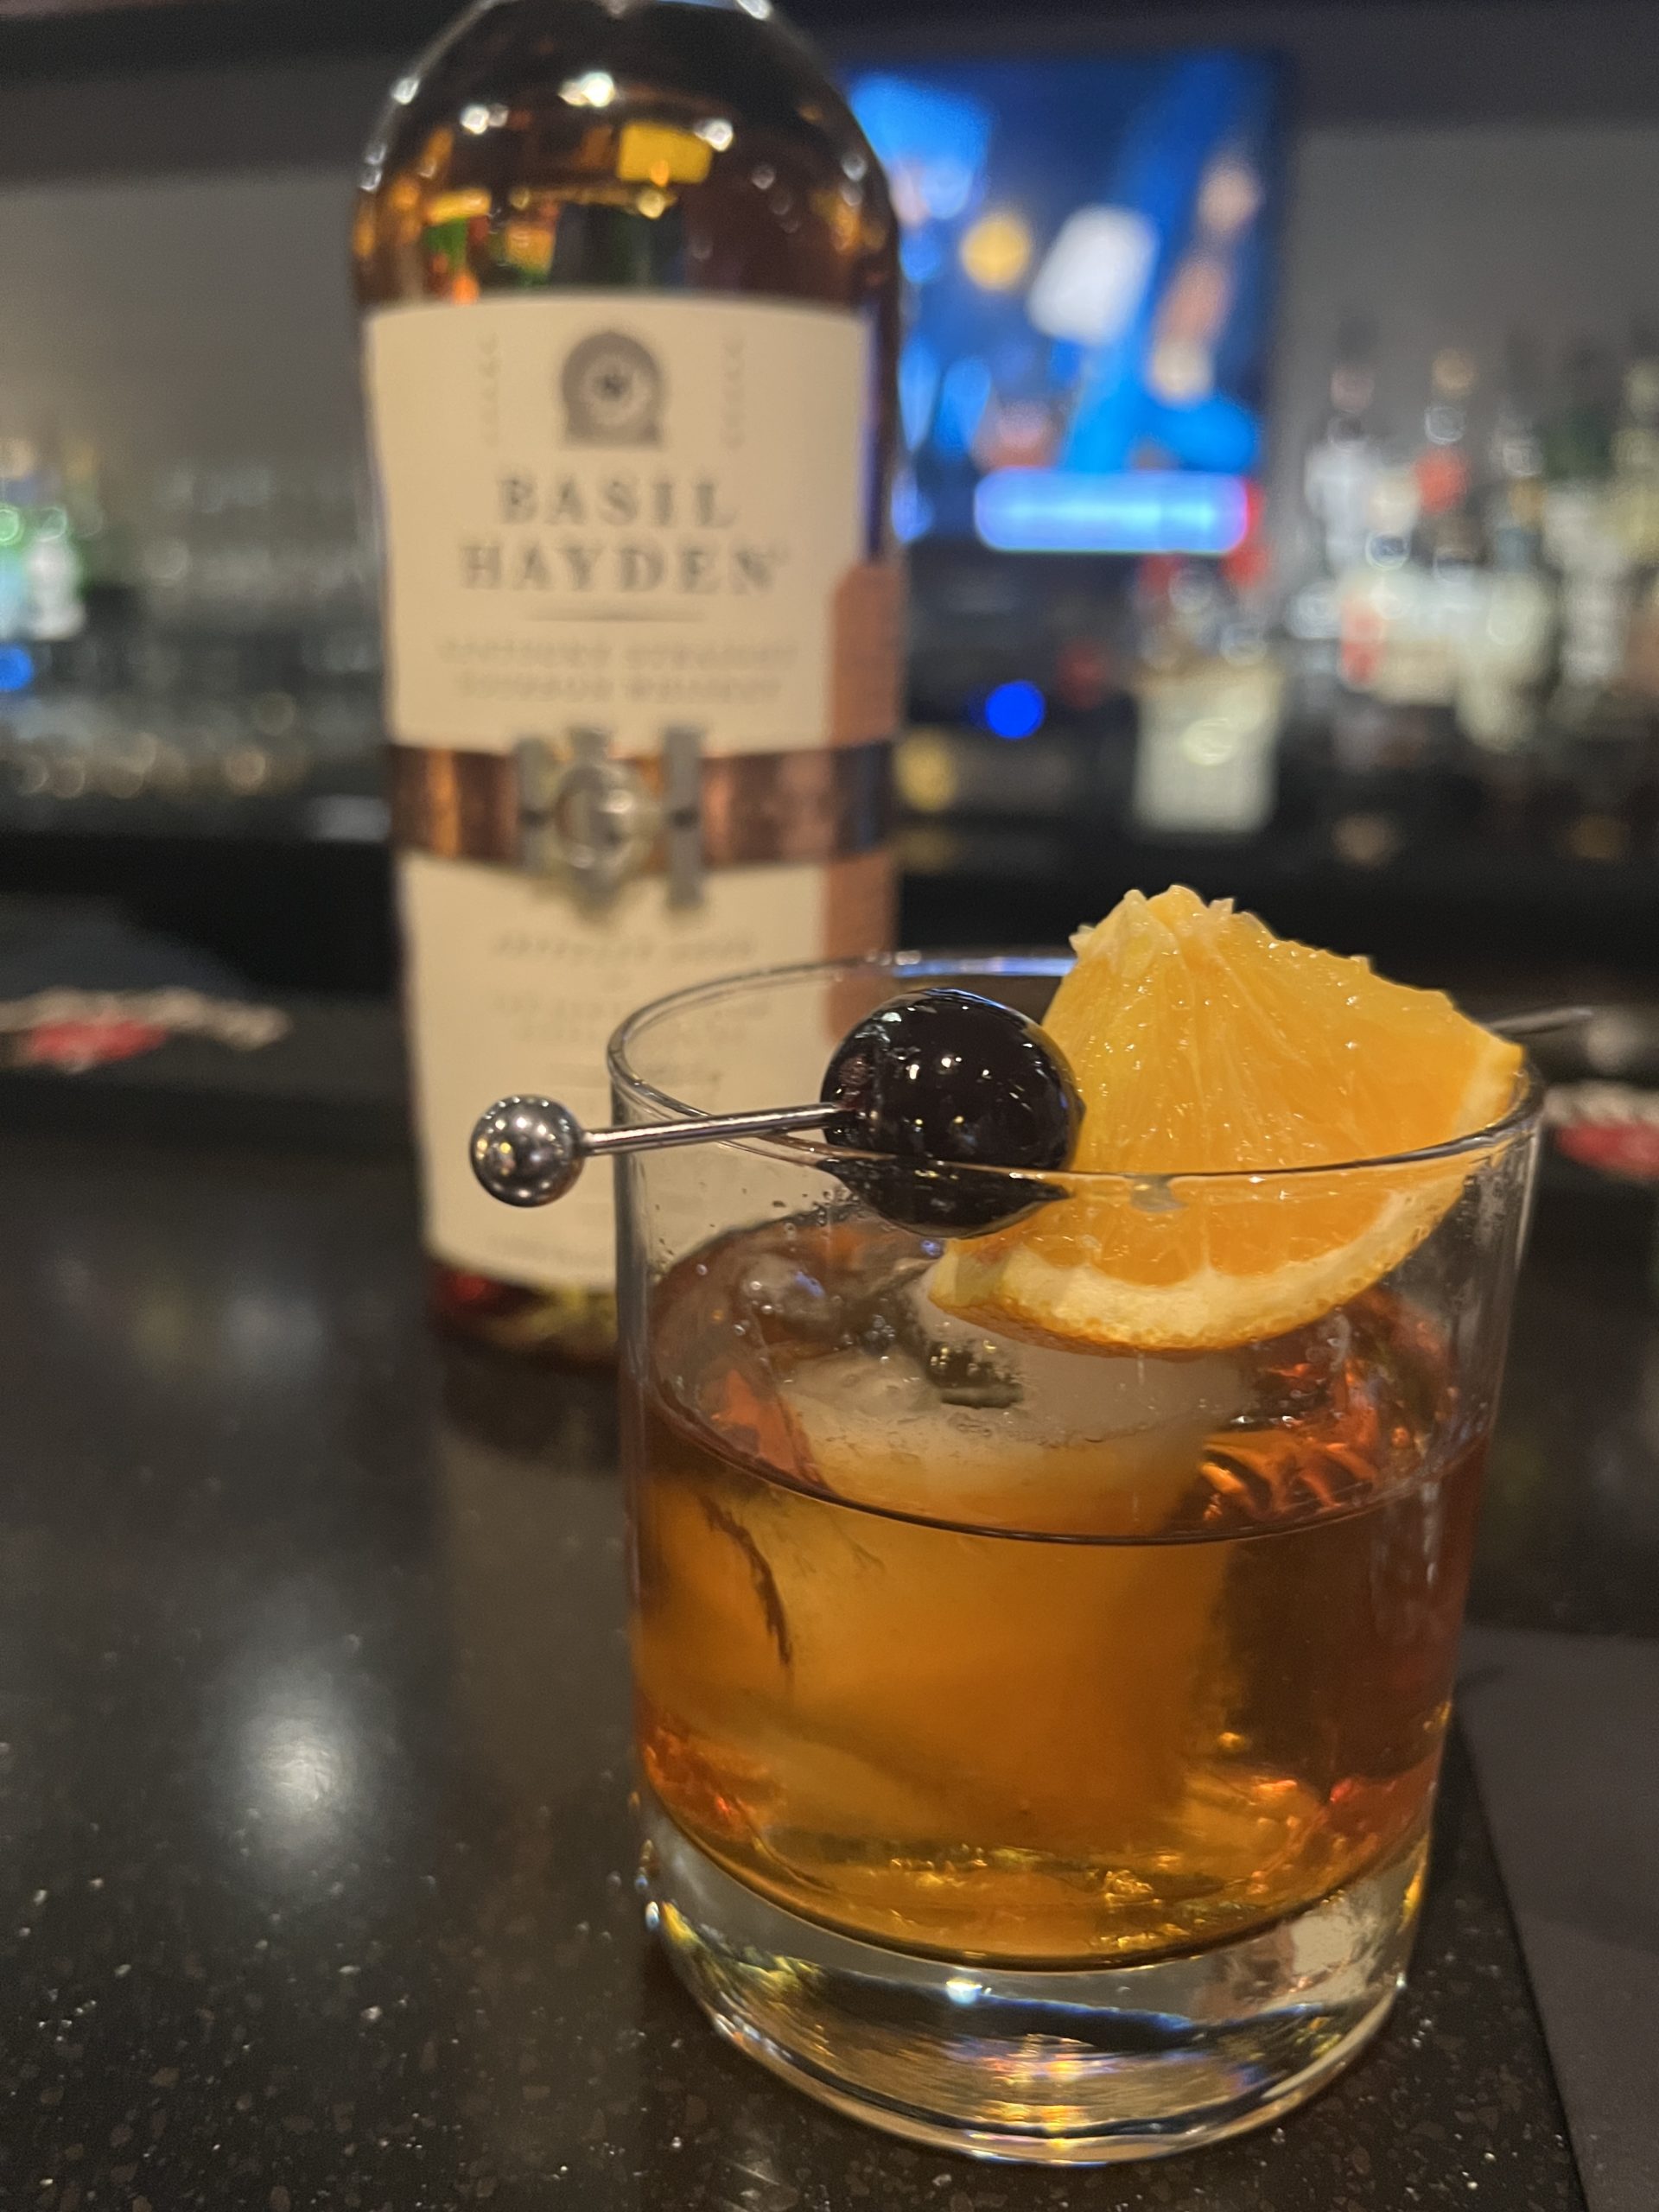 upgraded old fashioned with basil haydens and luxardo cherries